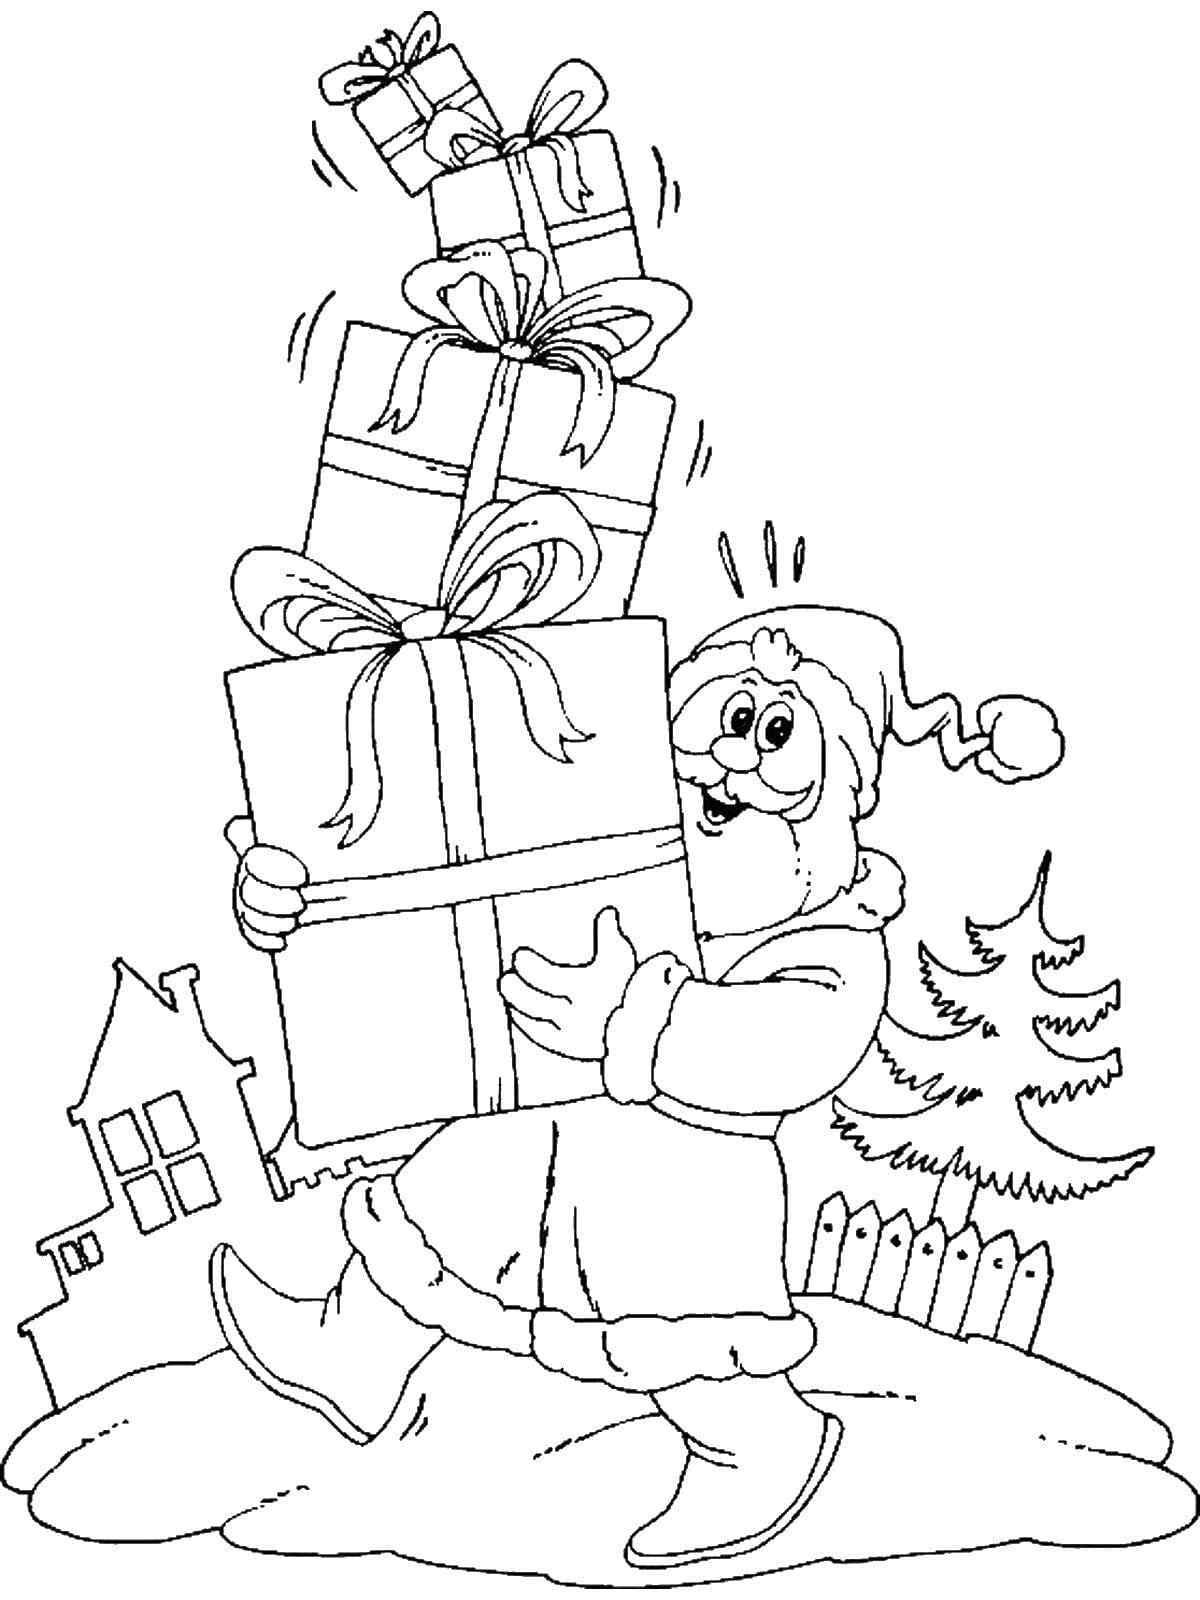 Santa Claus With A Mountain Of Gifts Coloring Page